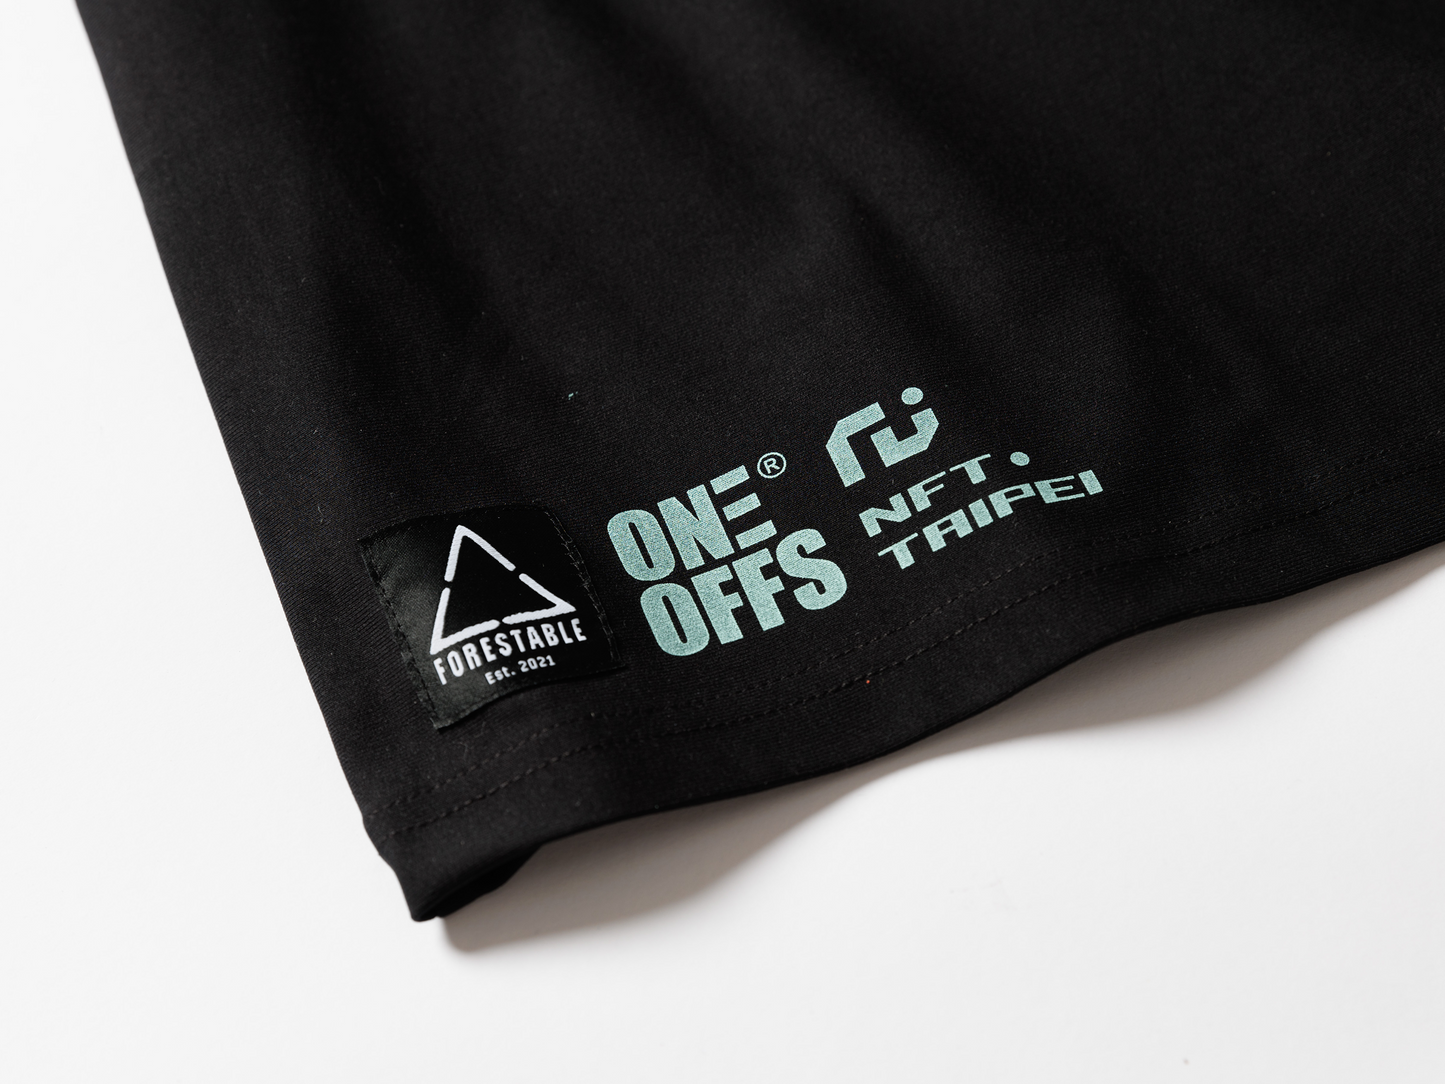 FRSTB The REVIVER Tシャツ / 通気速乾半袖トップ / ONEOFFS Edition